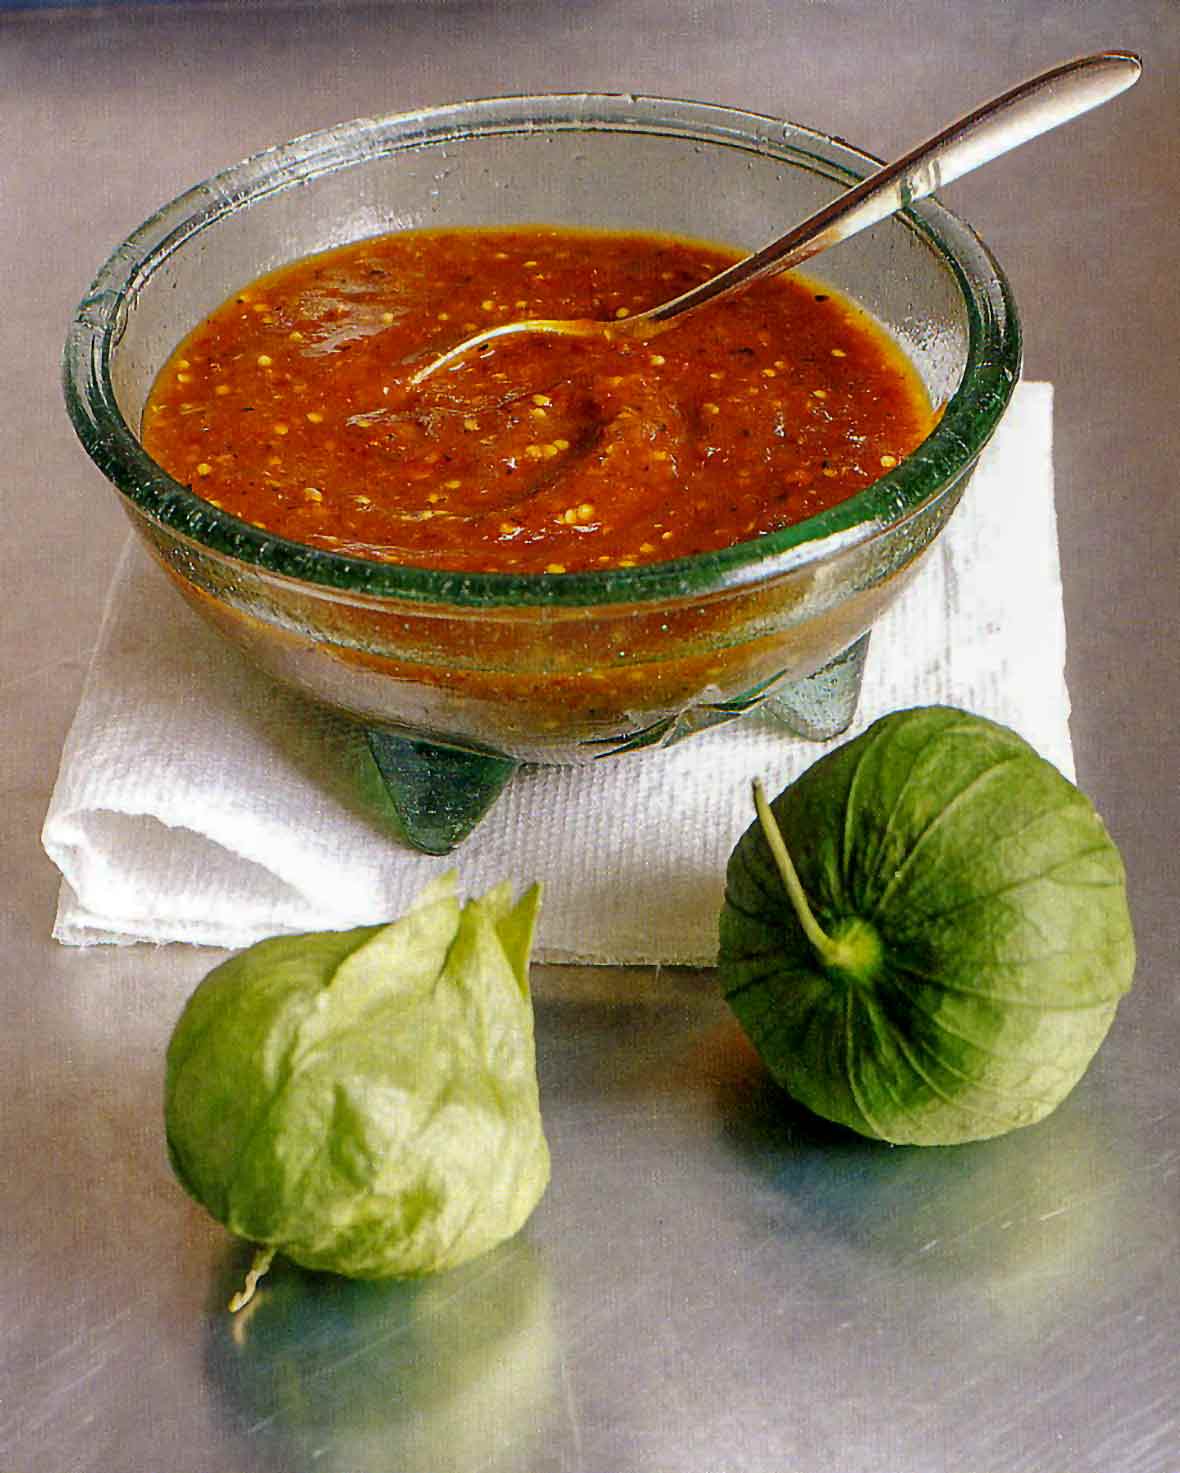 Smoky chipotle salsa with pan-roasted tomatillos in a glass bowl on a towel, two tomatillo in front